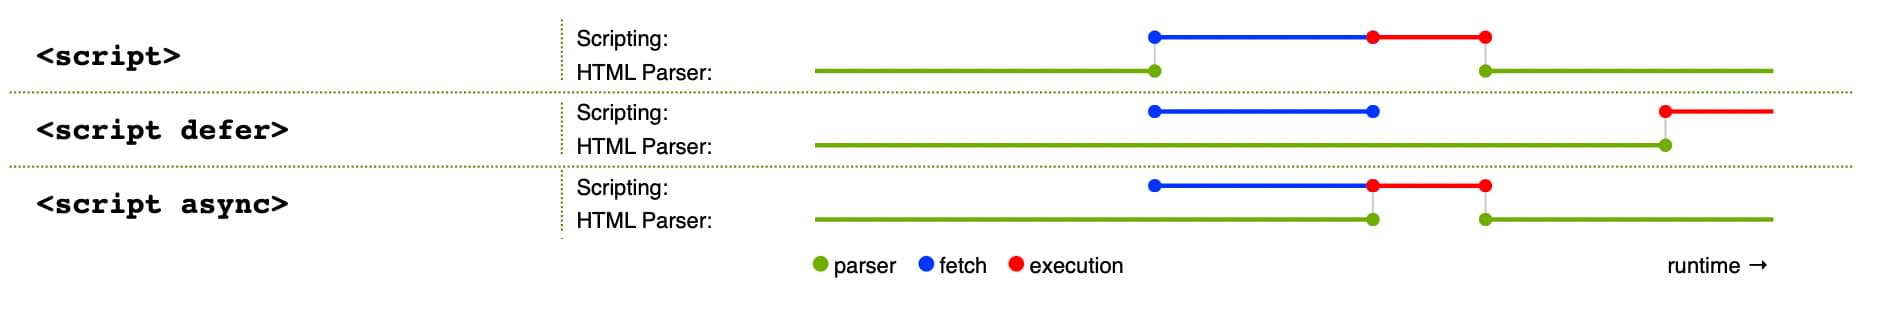 How the three script loading method work: default has parsing blocked while JavaScript is fetched and executed. With async, the parsing pauses for execution only. With defer, parsing isn't paused, but execution on happens after everything is else is parsed.